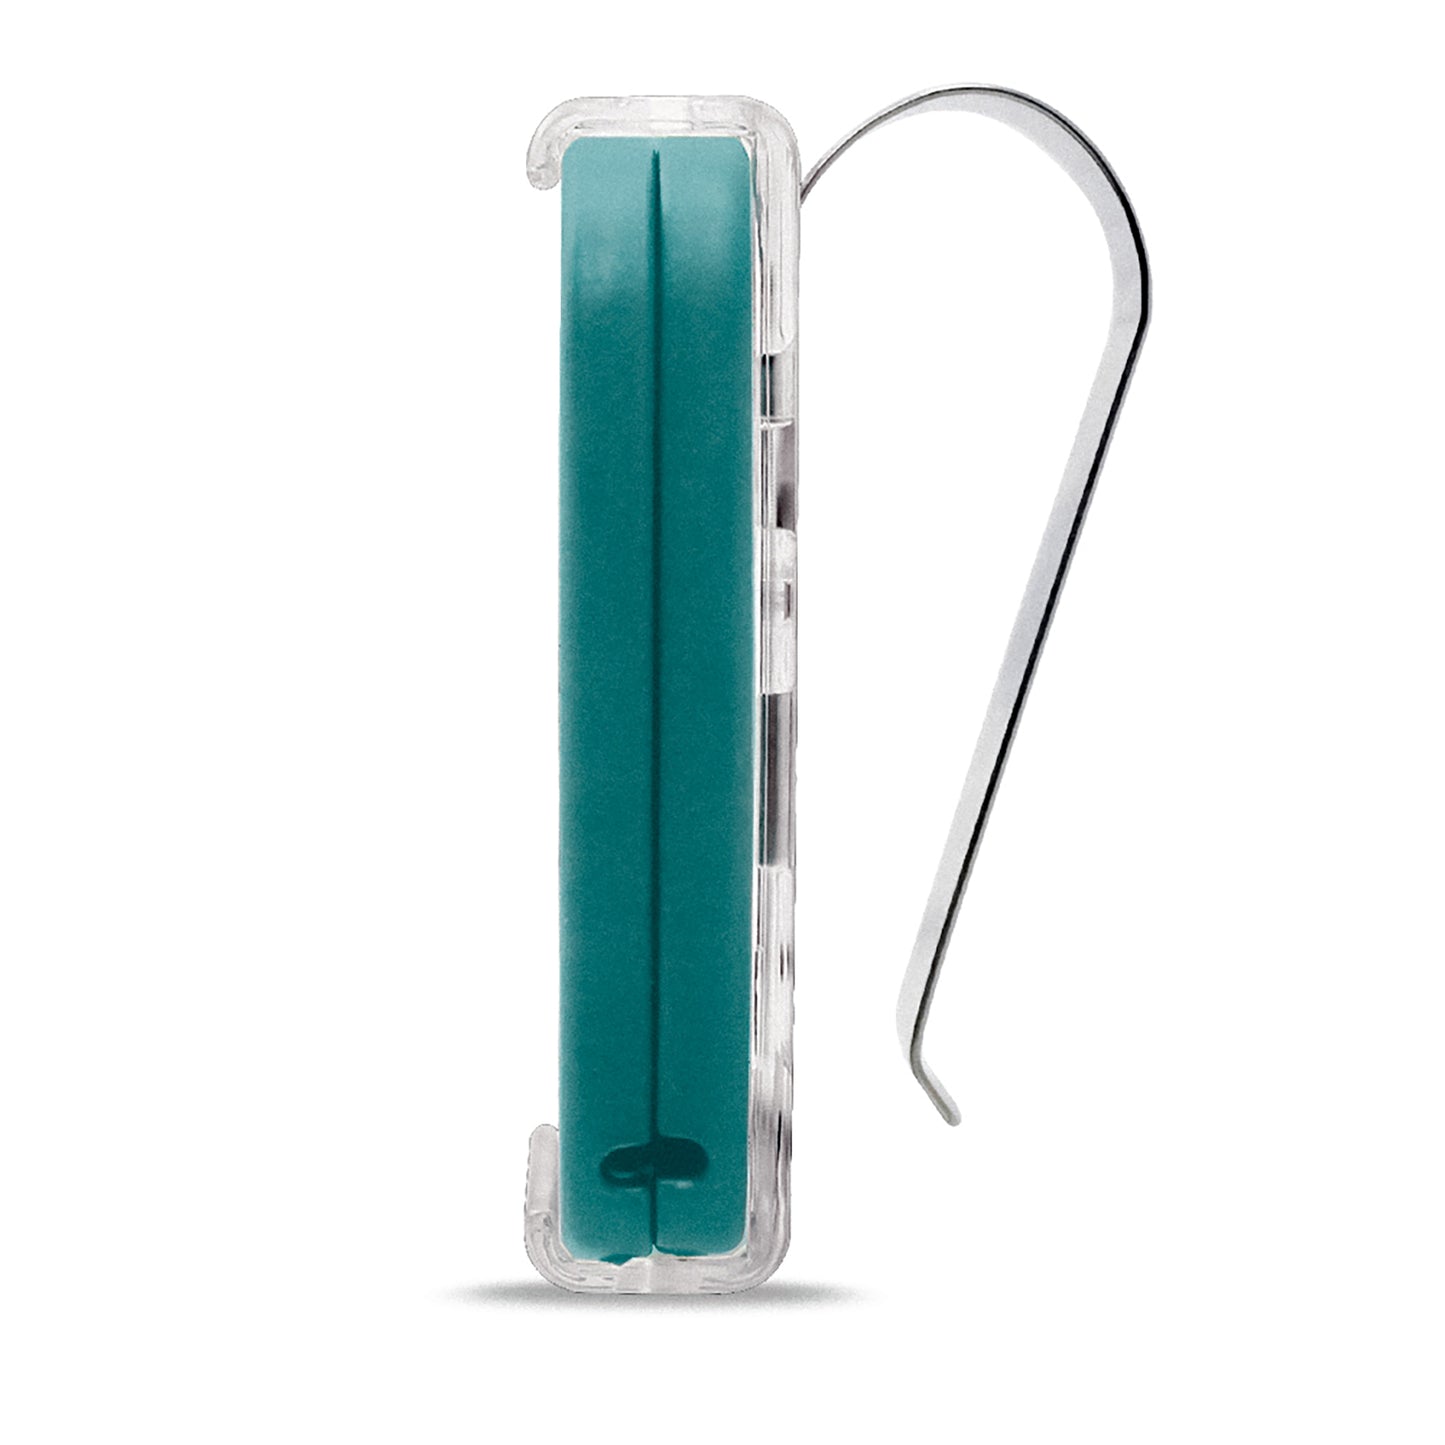 WHY EVO MINI Multi-frequency rolling code remote control from 280 to 868 MHz with Visor Clip, programmable self-learning gate opener, wide-range remote control with 4 buttons, pure emerald blue